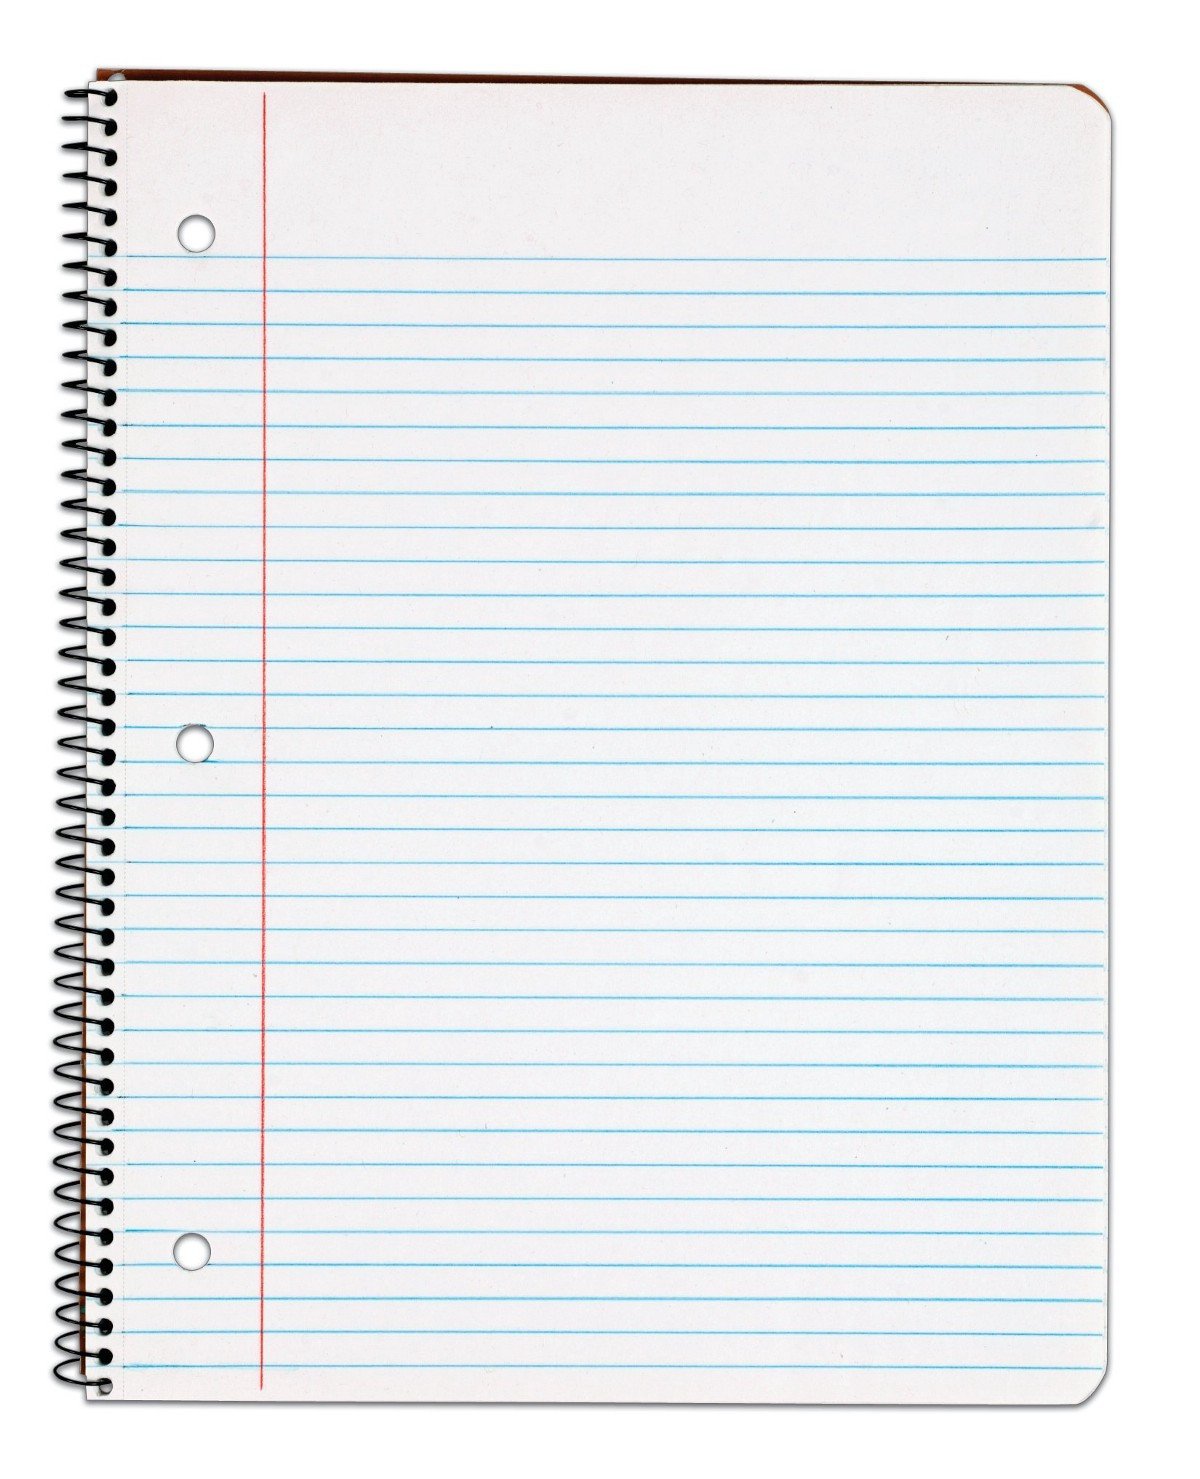 Do you really have to use college ruled paper when you’re